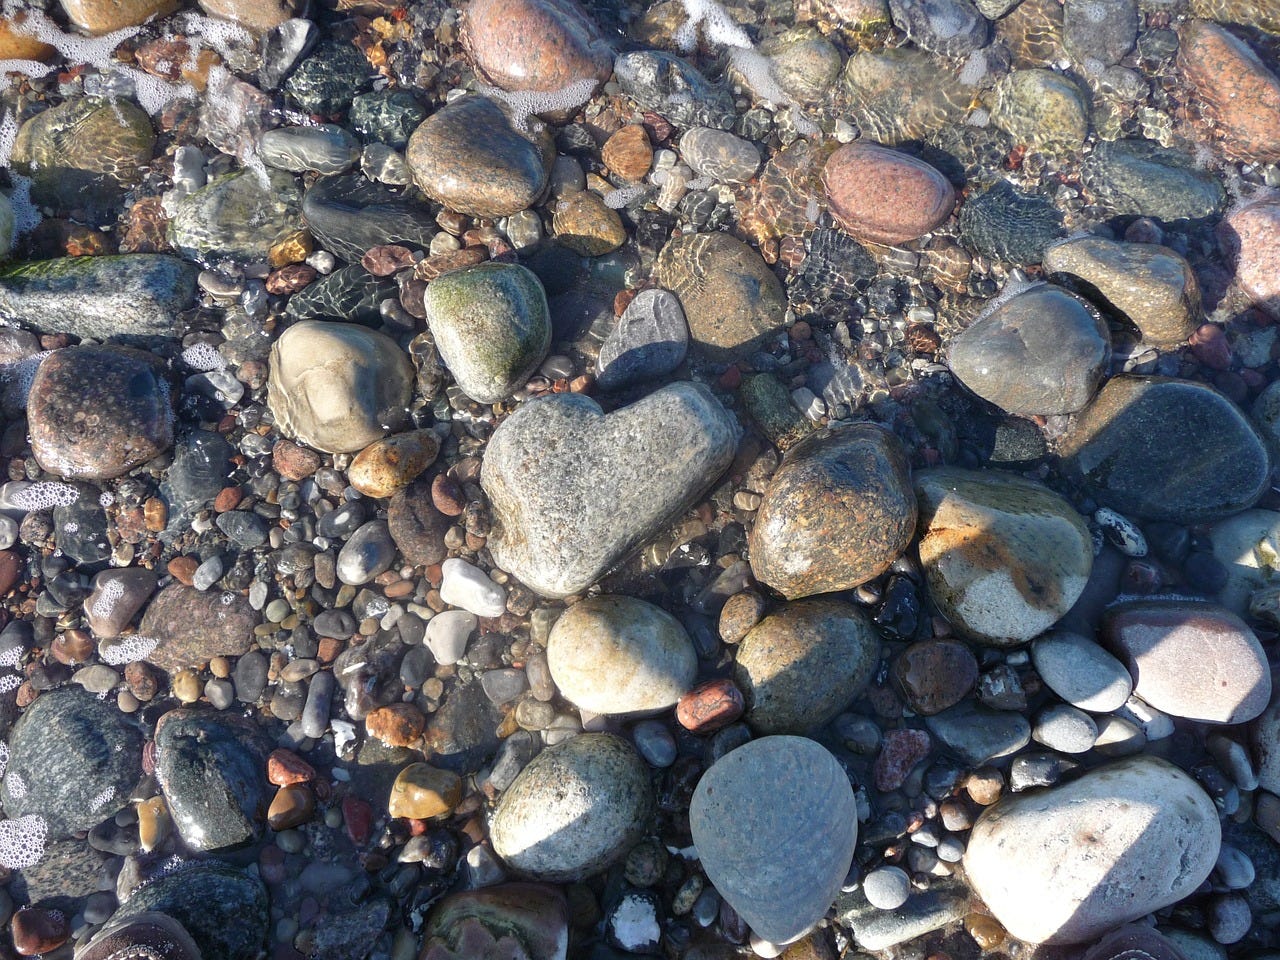 heart shaped stone among other stones on beach